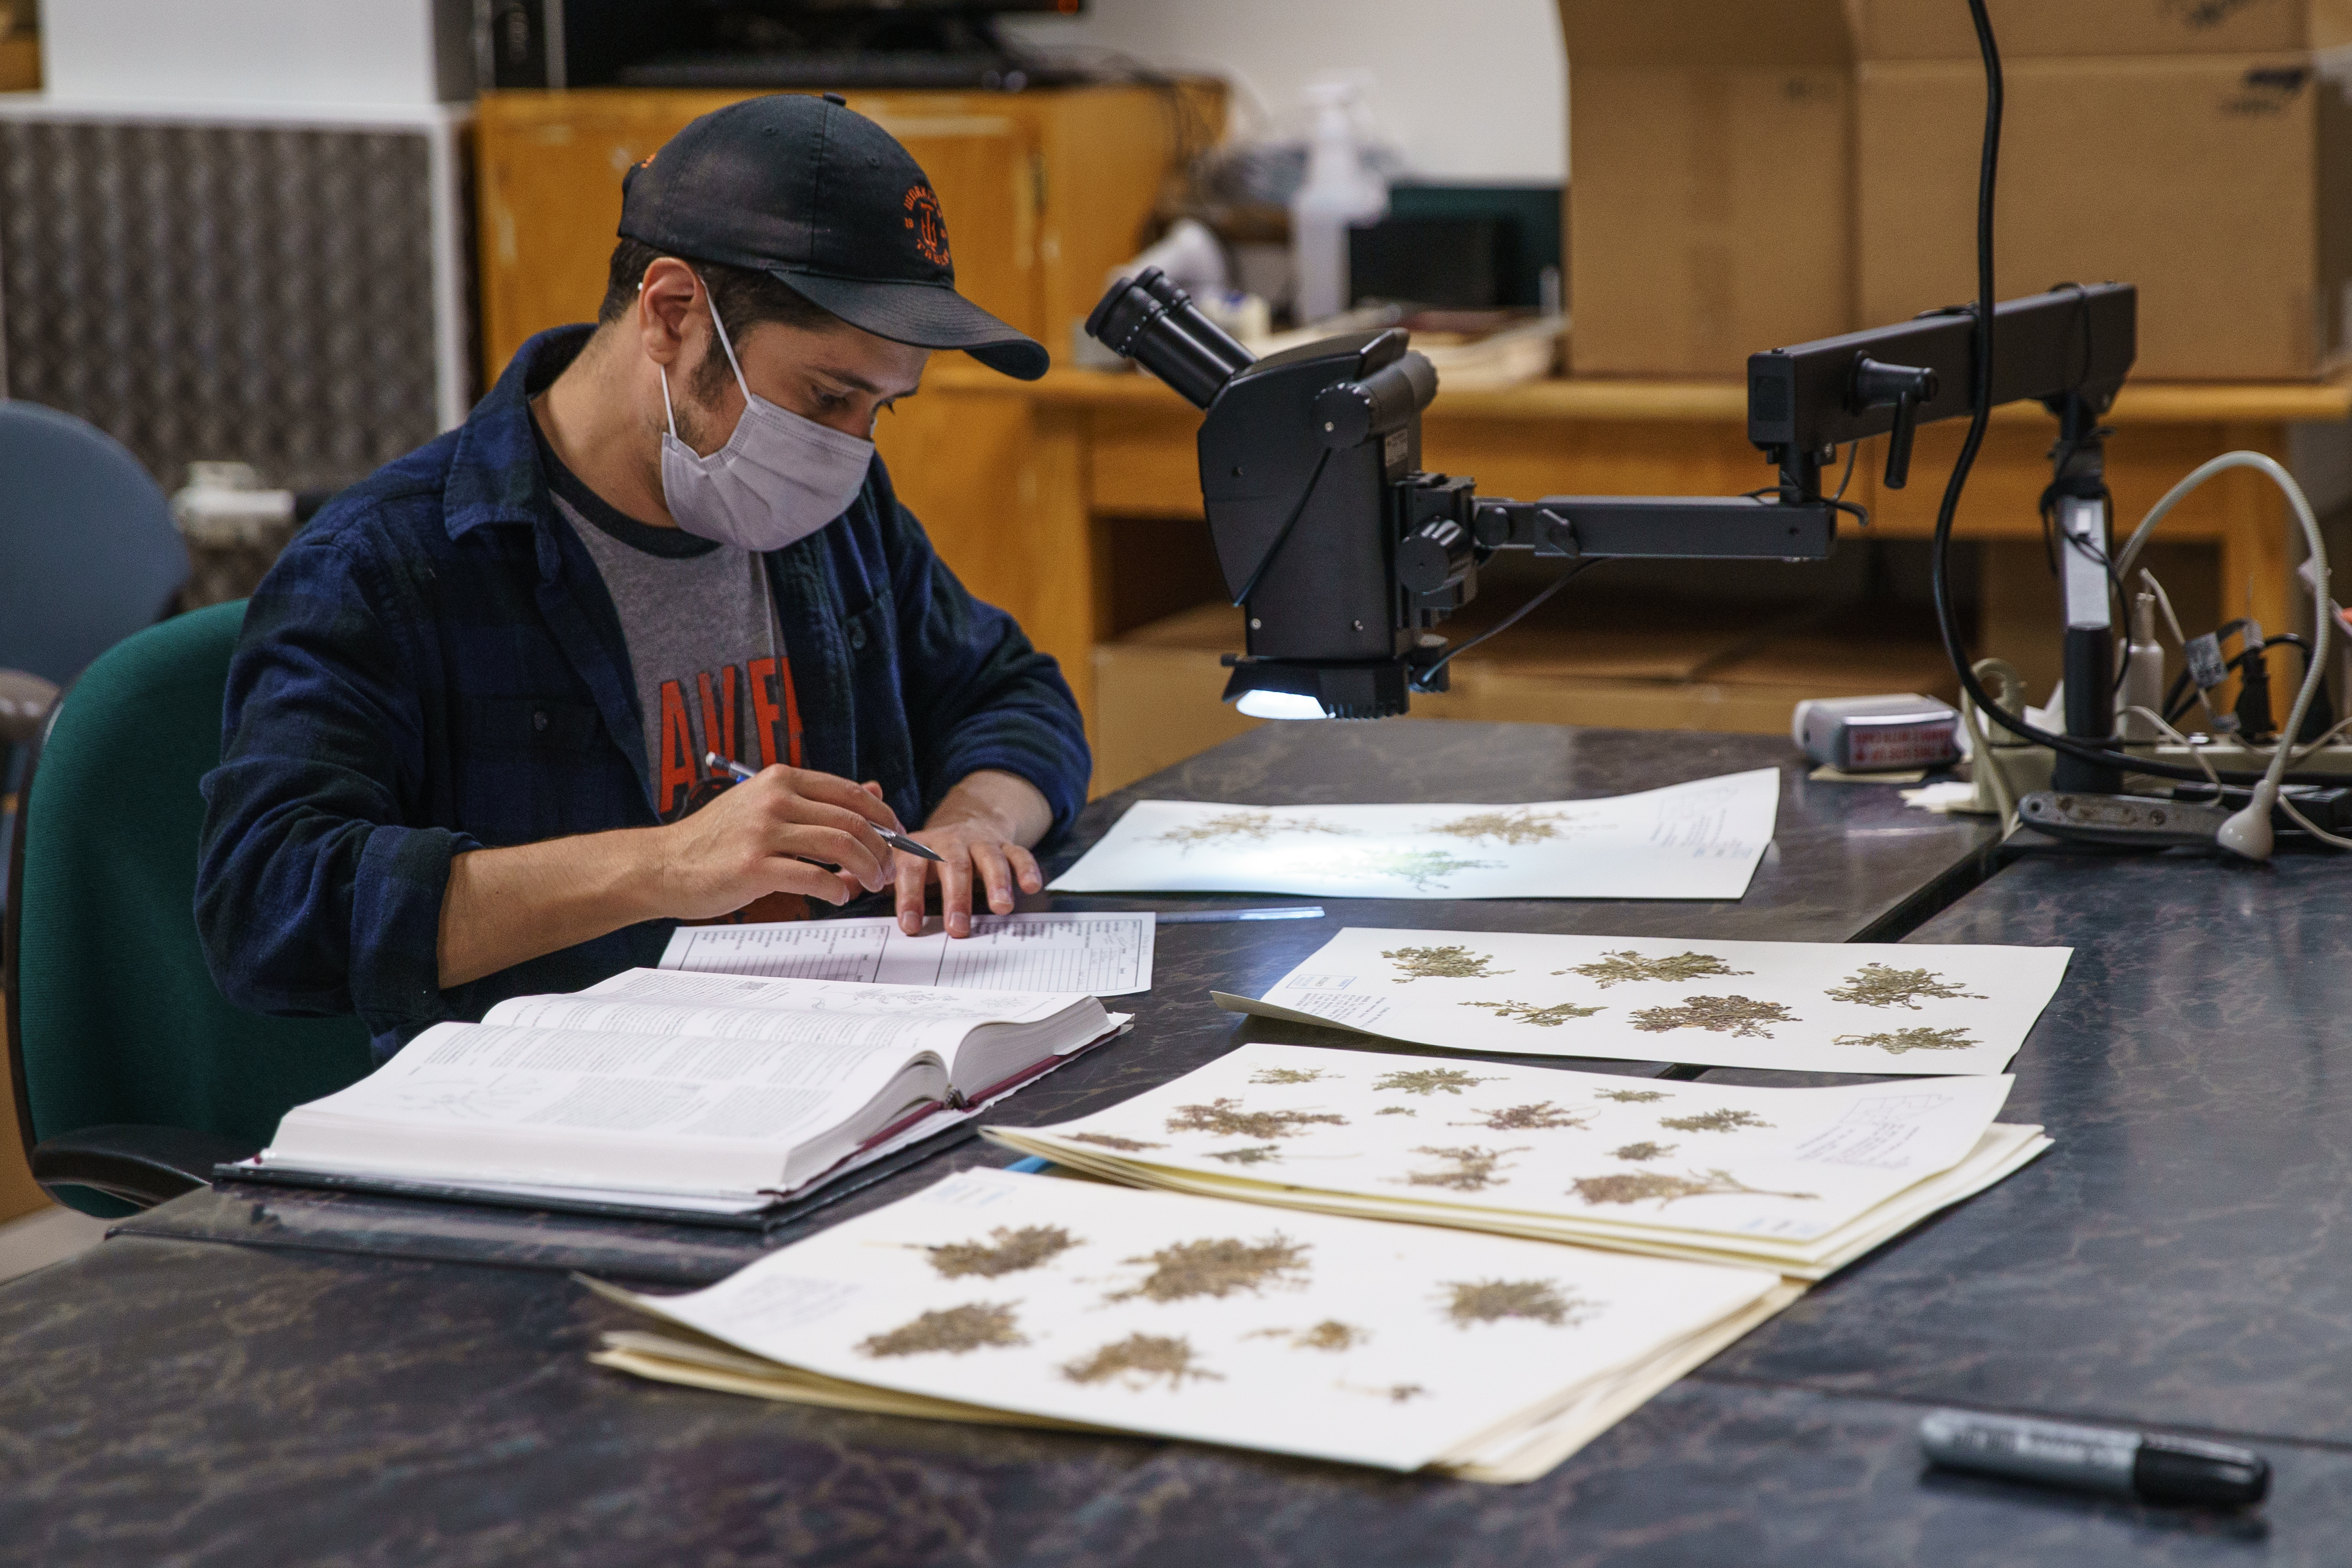 Amadeo Ramos Jr. works at OregonFlora. The project, which manages oregonflora.org and a wildflowers app, has produced two Flora of Oregon print volumes and is finalizing production on a third volume. 